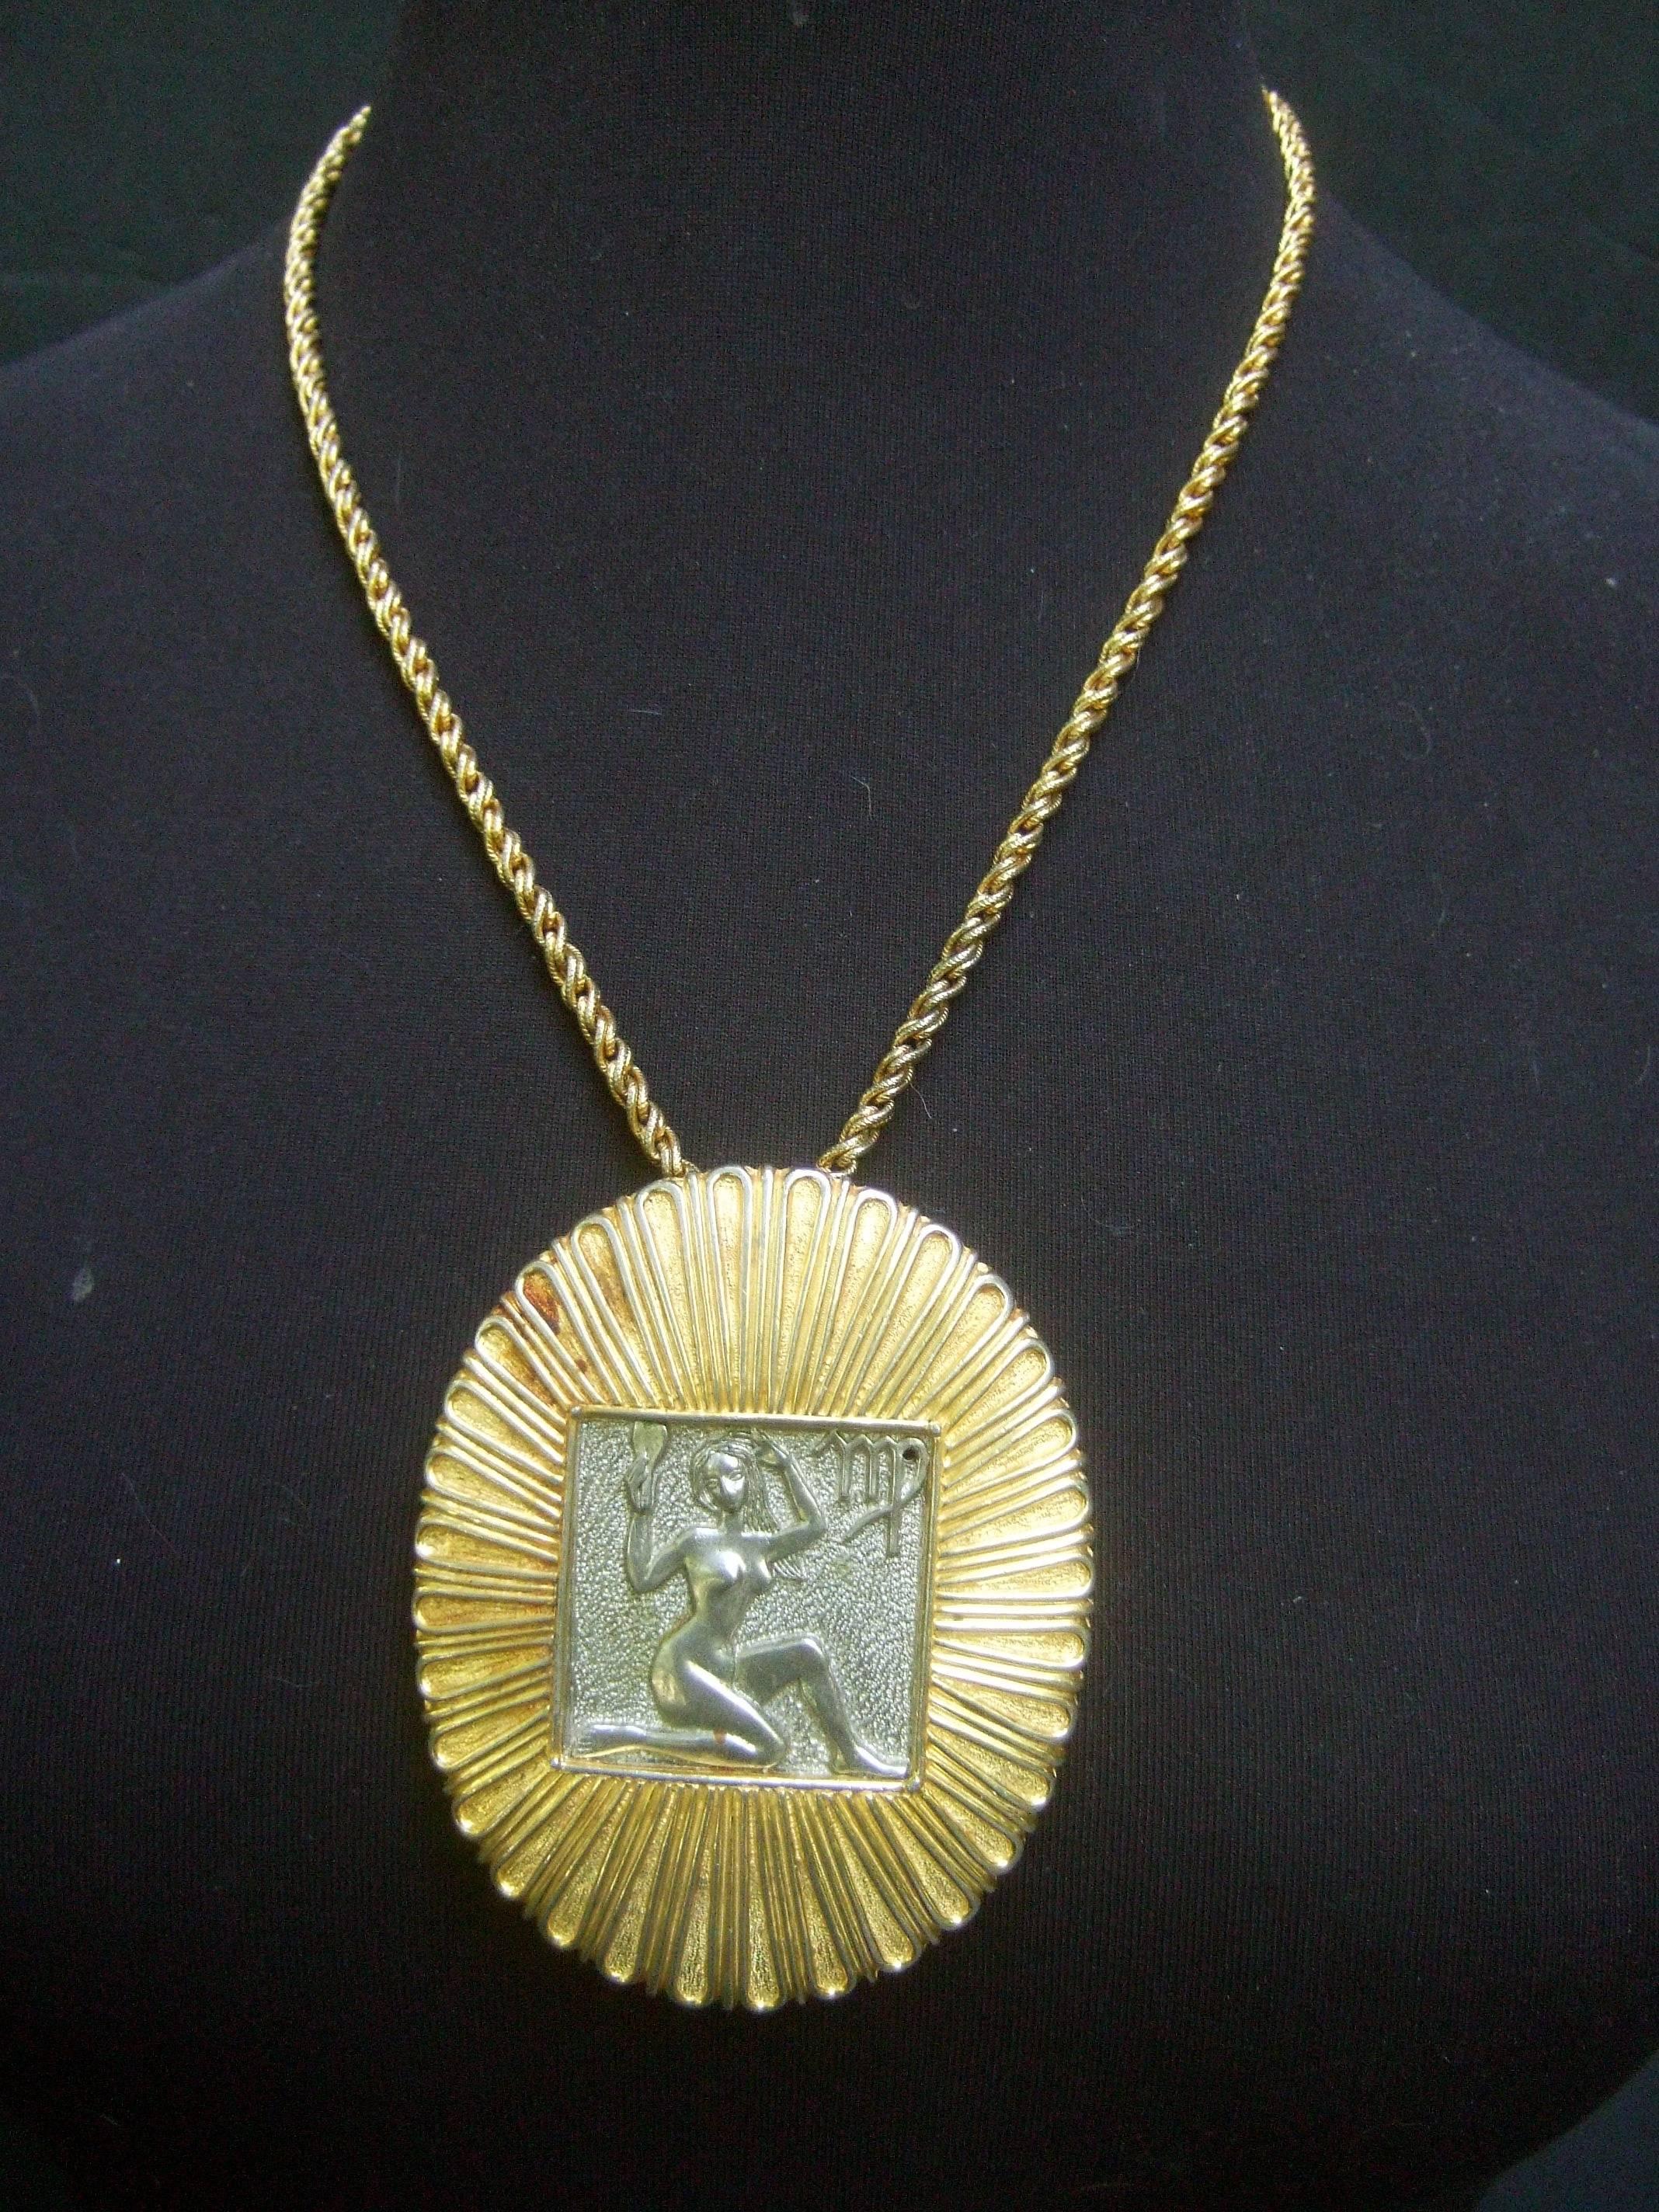 Judith Leiber Figural Woman Pendant Necklace c 1970s In Excellent Condition For Sale In University City, MO